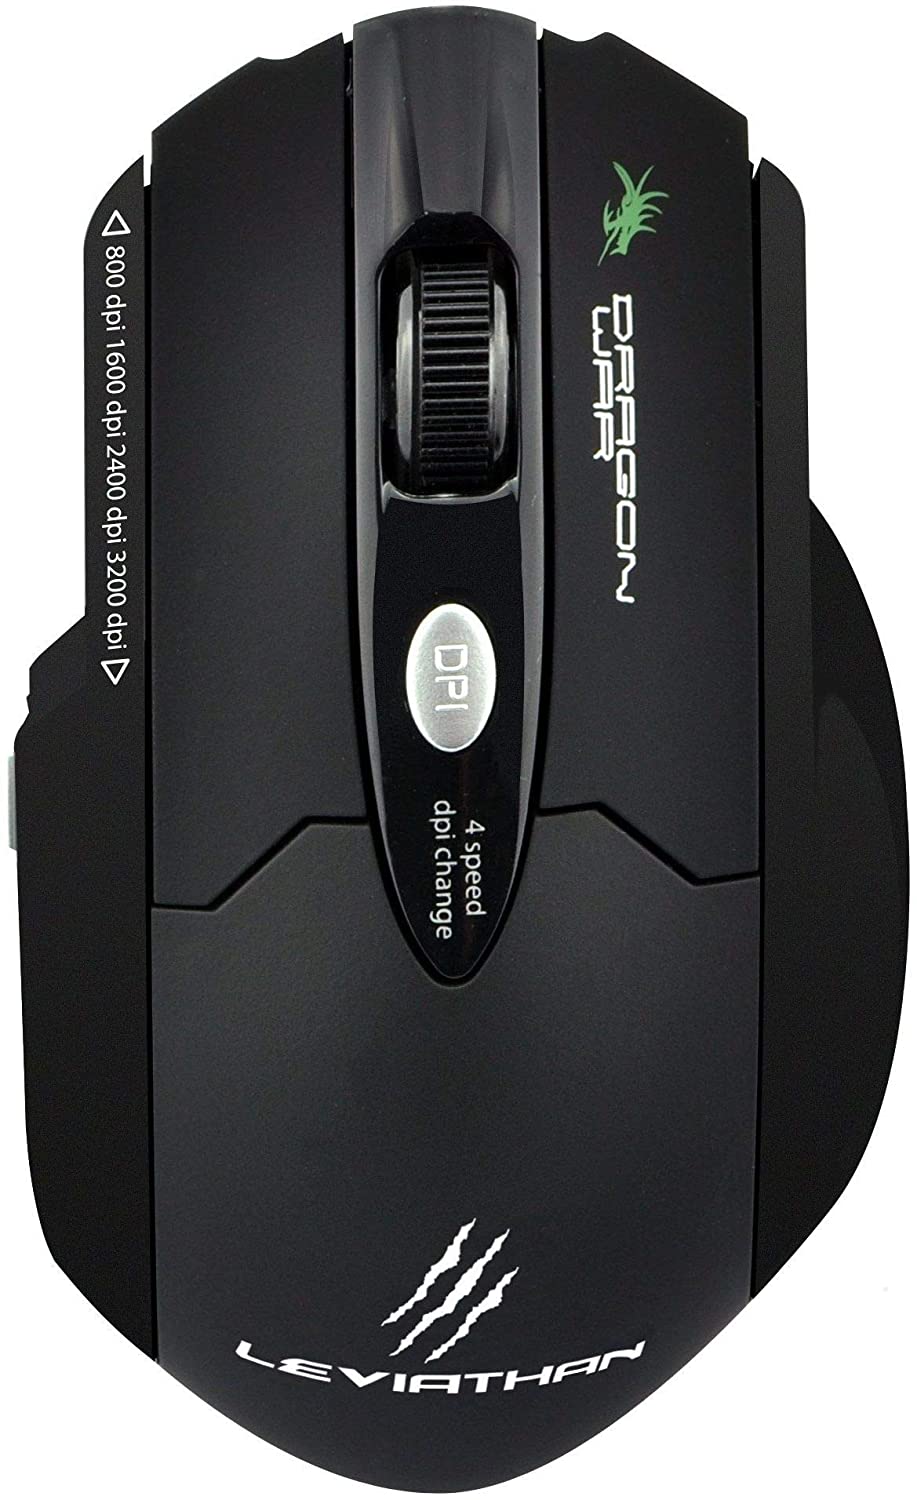 Best Gaming Mouse under 1000 in India